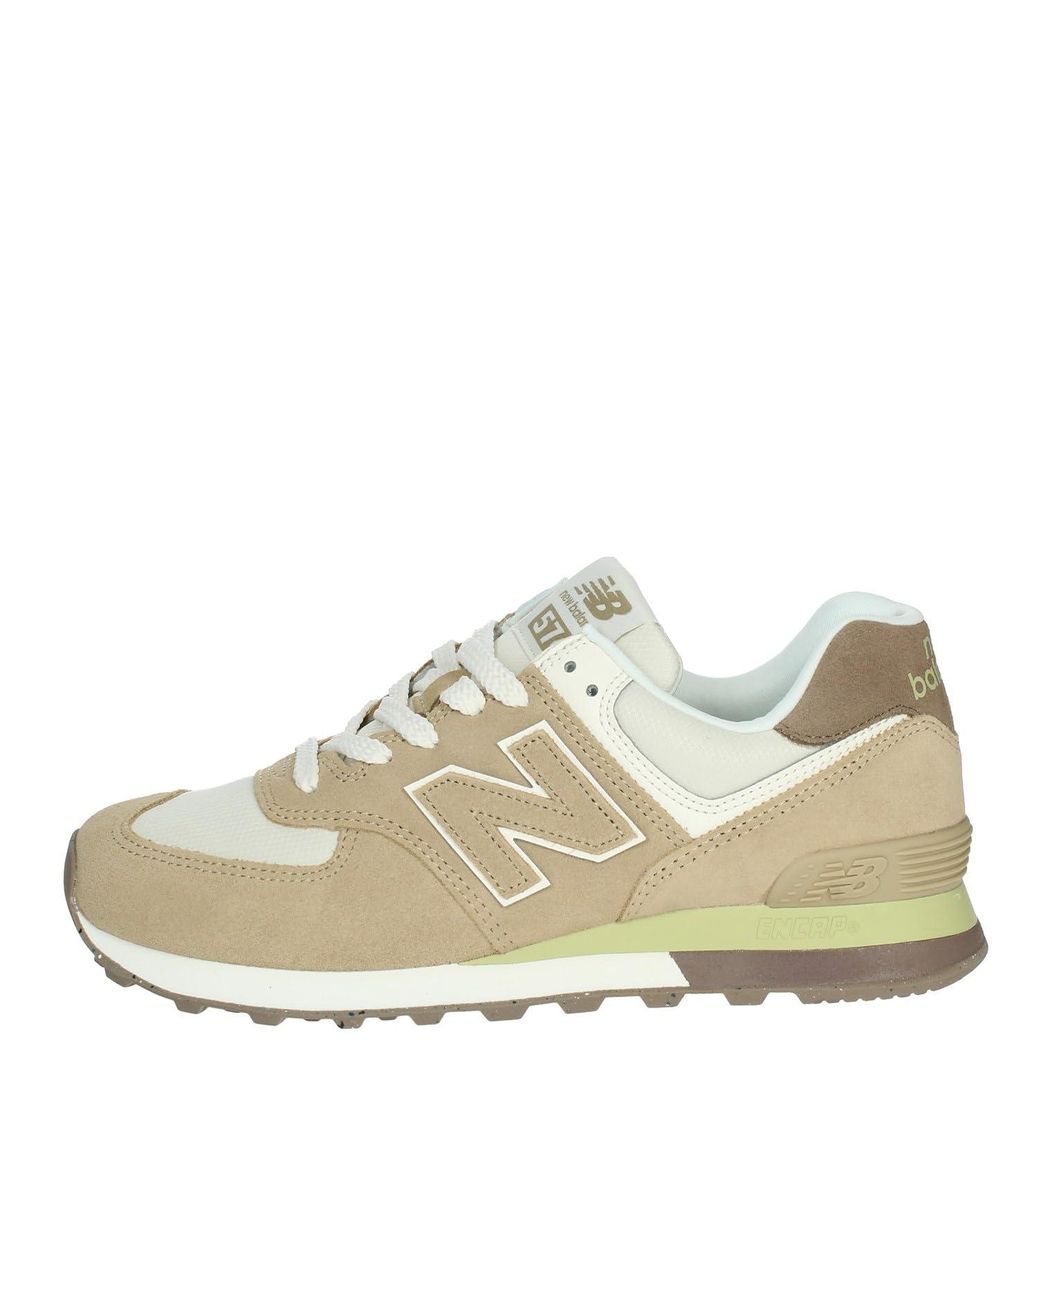 New Balance 574 Trainers Eu 44 in White | Lyst UK